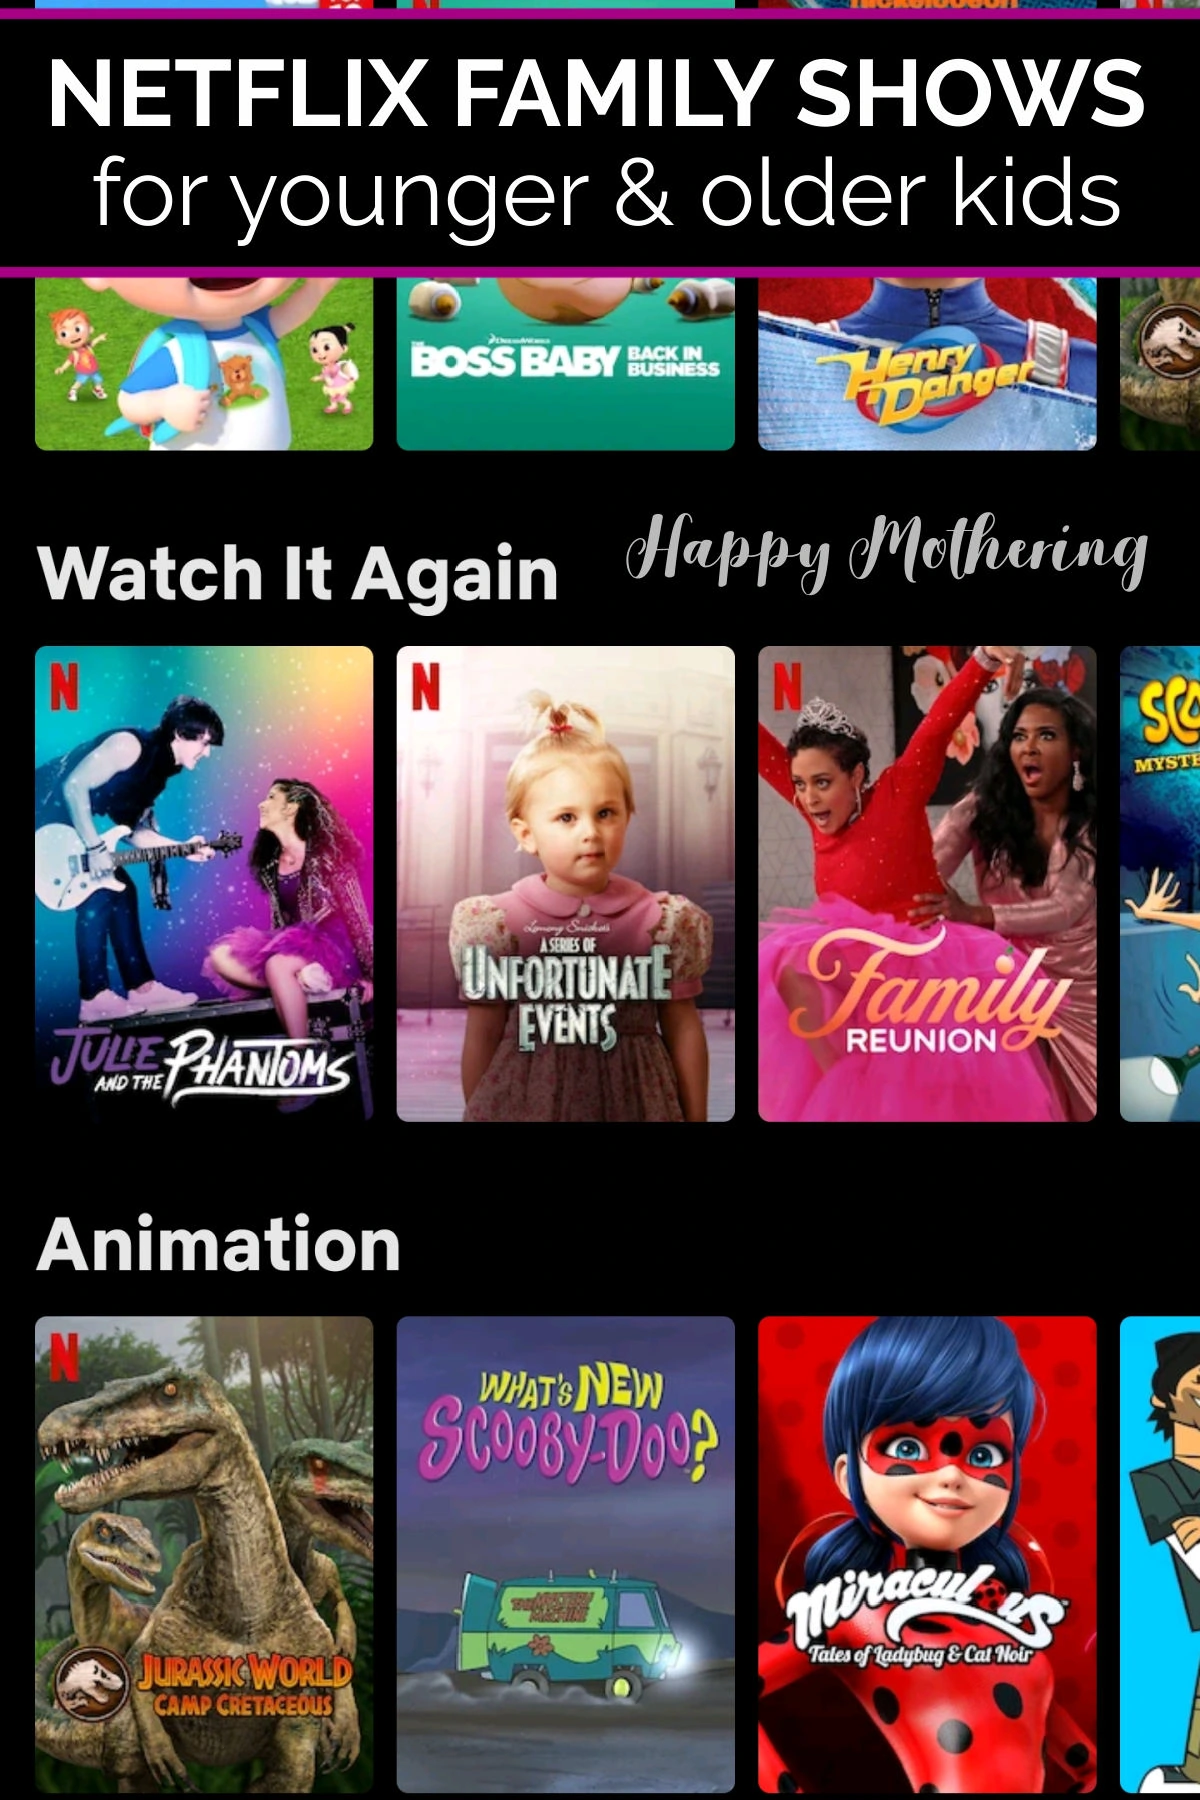 Screenshot from Netflix mobile app of family shows on Netflix.